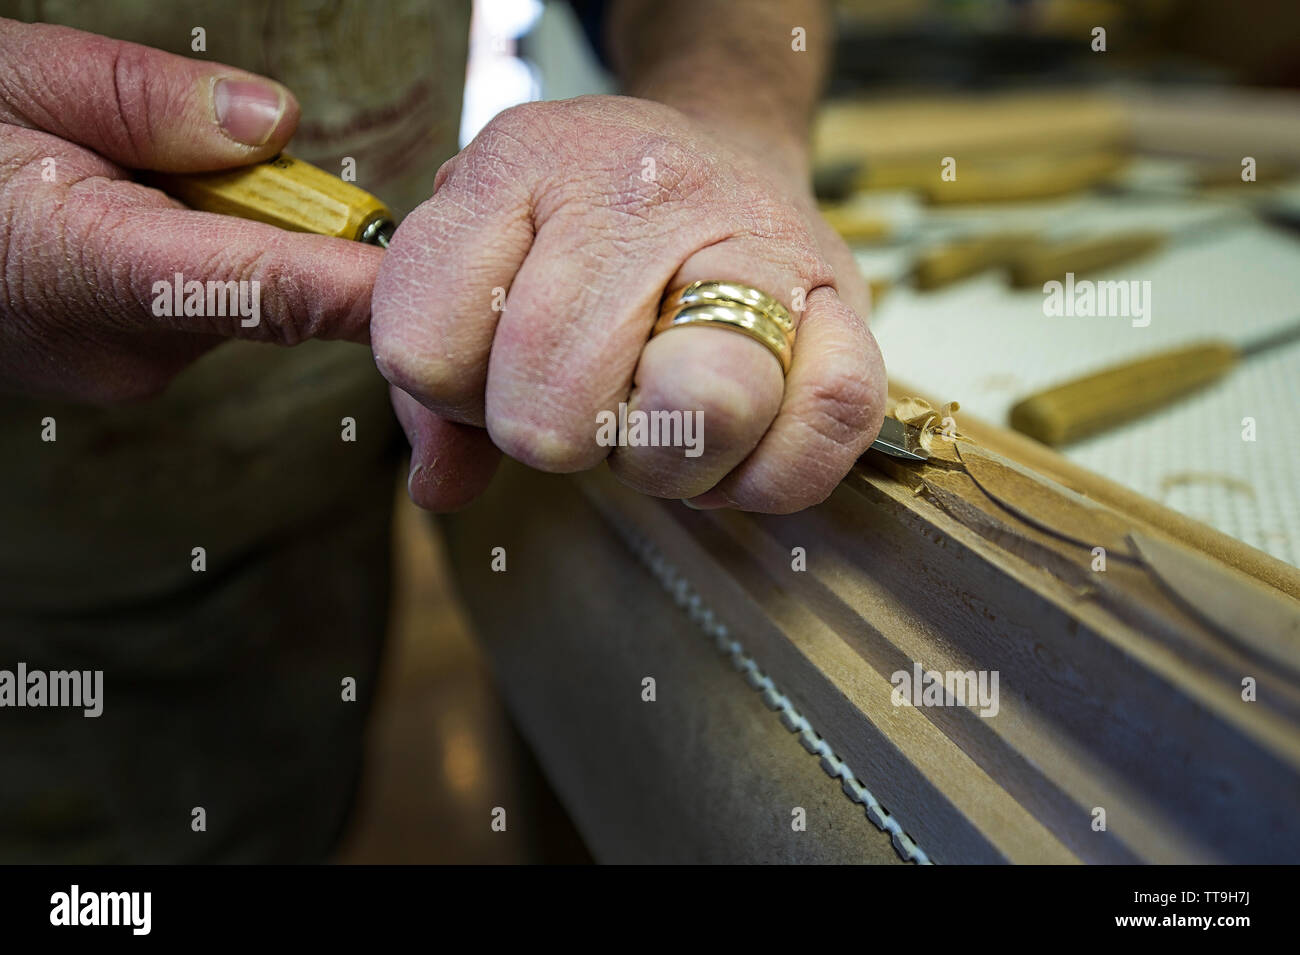 UNITED STATES - MARCH 02: Peter H. Miller, frame maker and owner of P.H. Miller Studio works in his studio in Berryville Virginia. Miller is widely kn Stock Photo